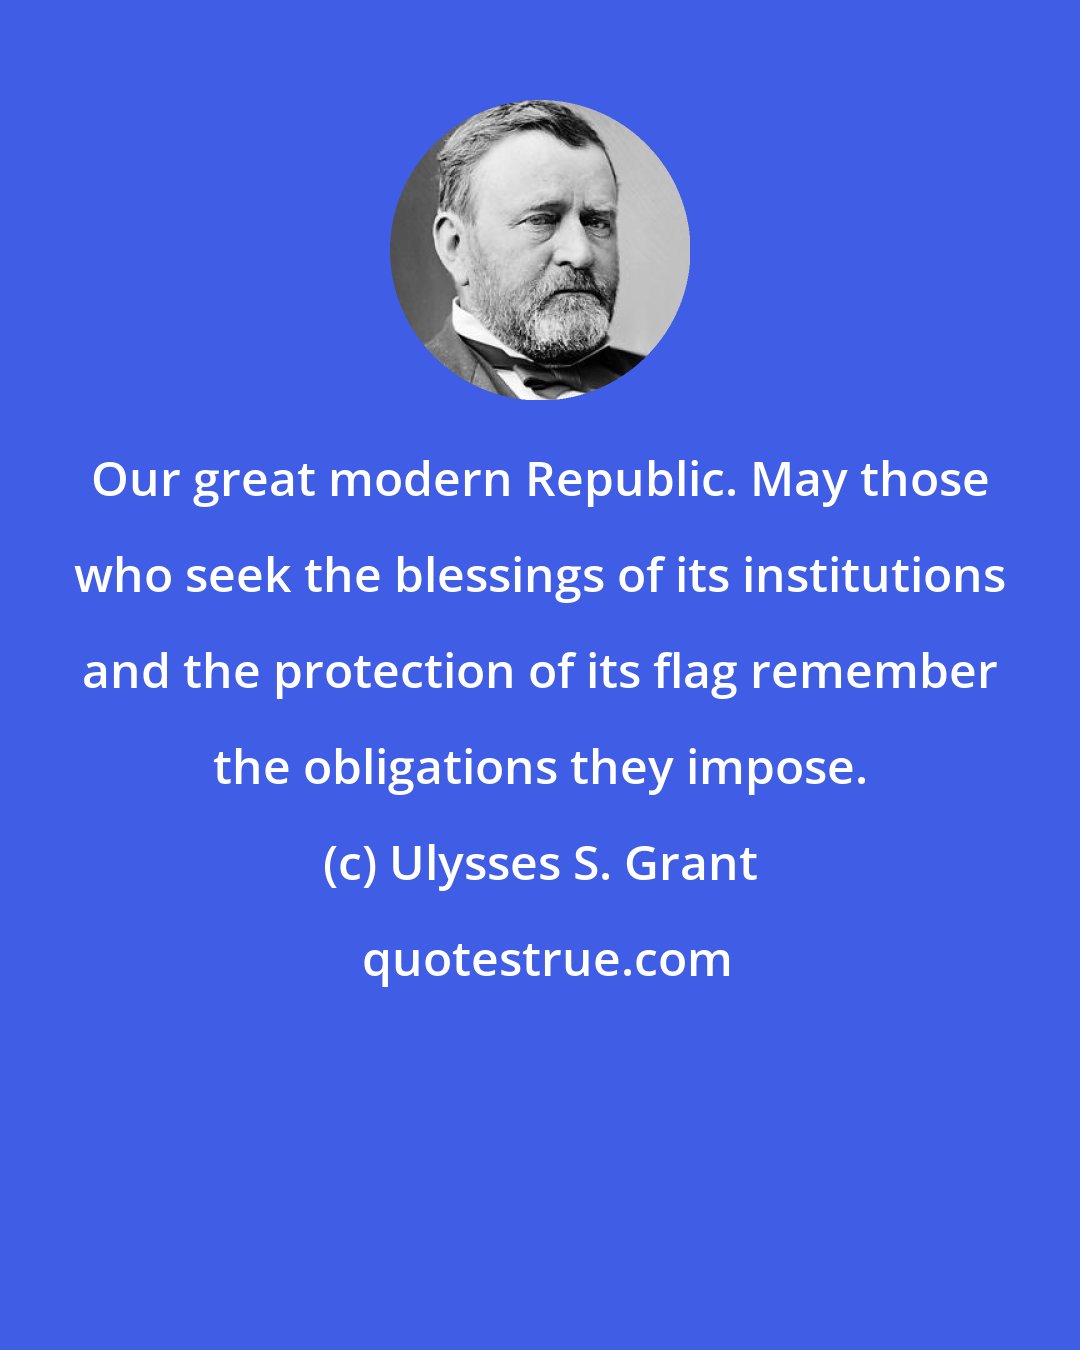 Ulysses S. Grant: Our great modern Republic. May those who seek the blessings of its institutions and the protection of its flag remember the obligations they impose.